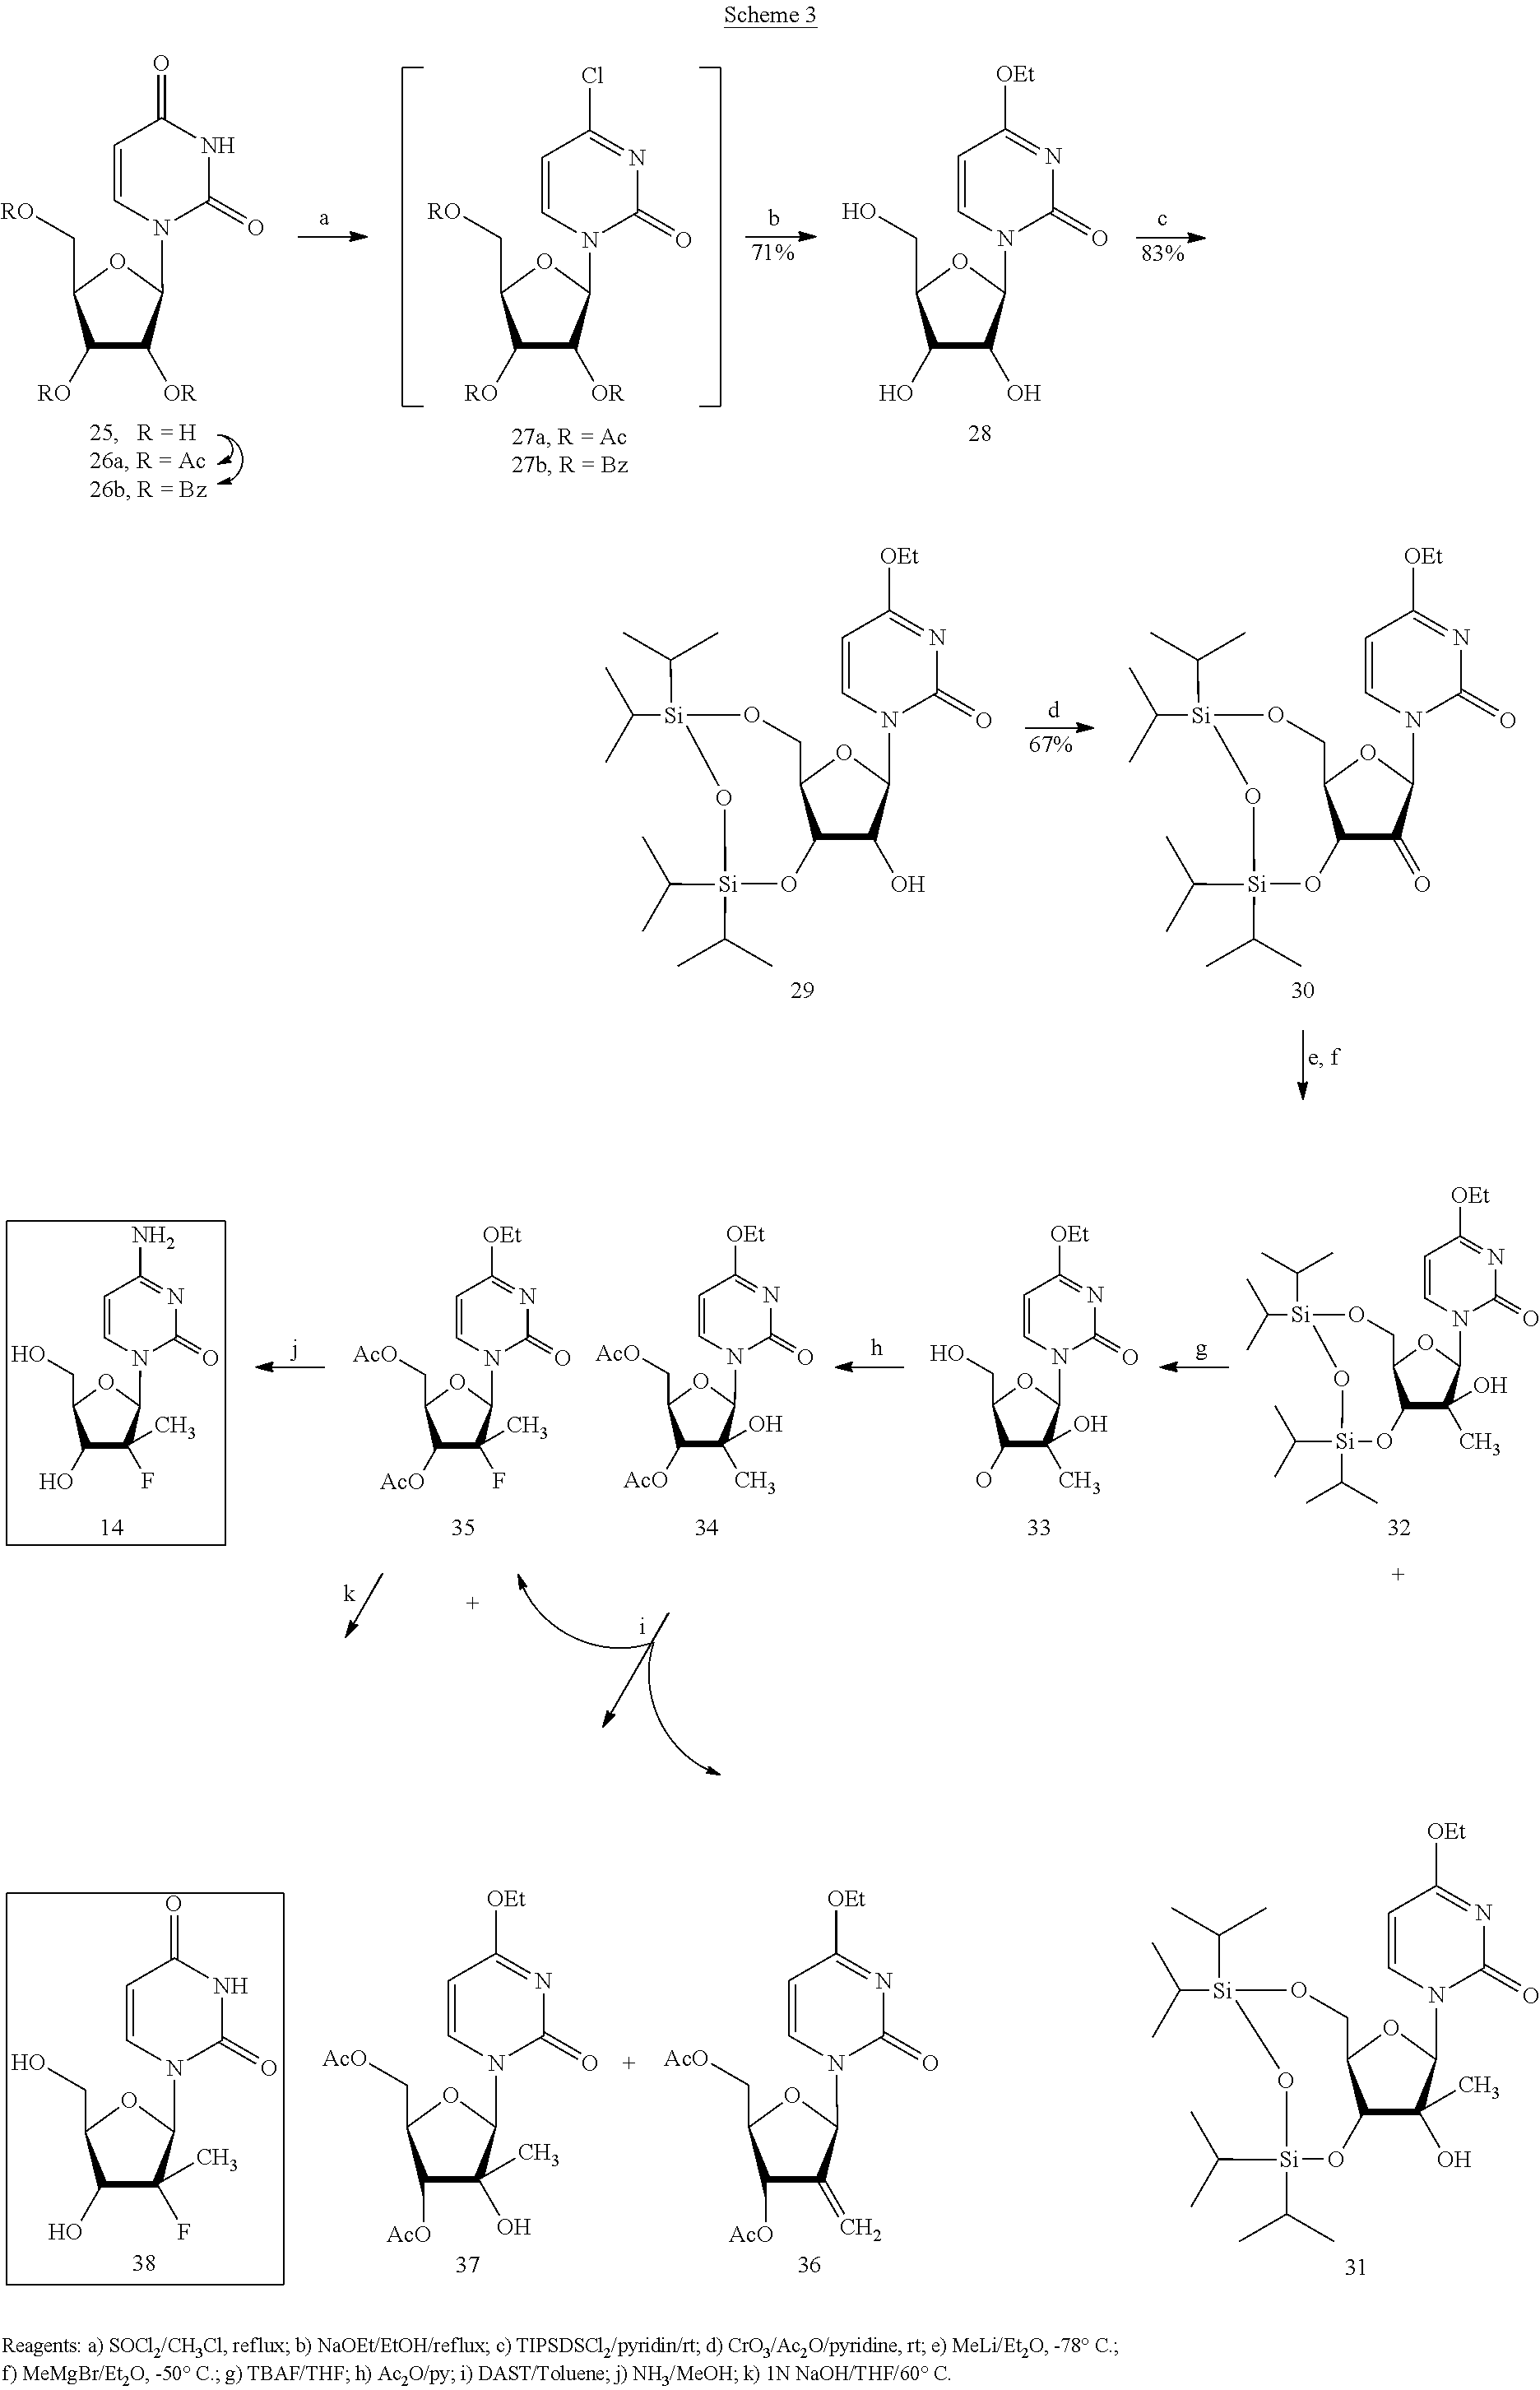 Preparation of 2'-fluoro-2'-alkyl-substituted or other optionally substituted ribofuranosyl pyrimidines and purines and their derivatives